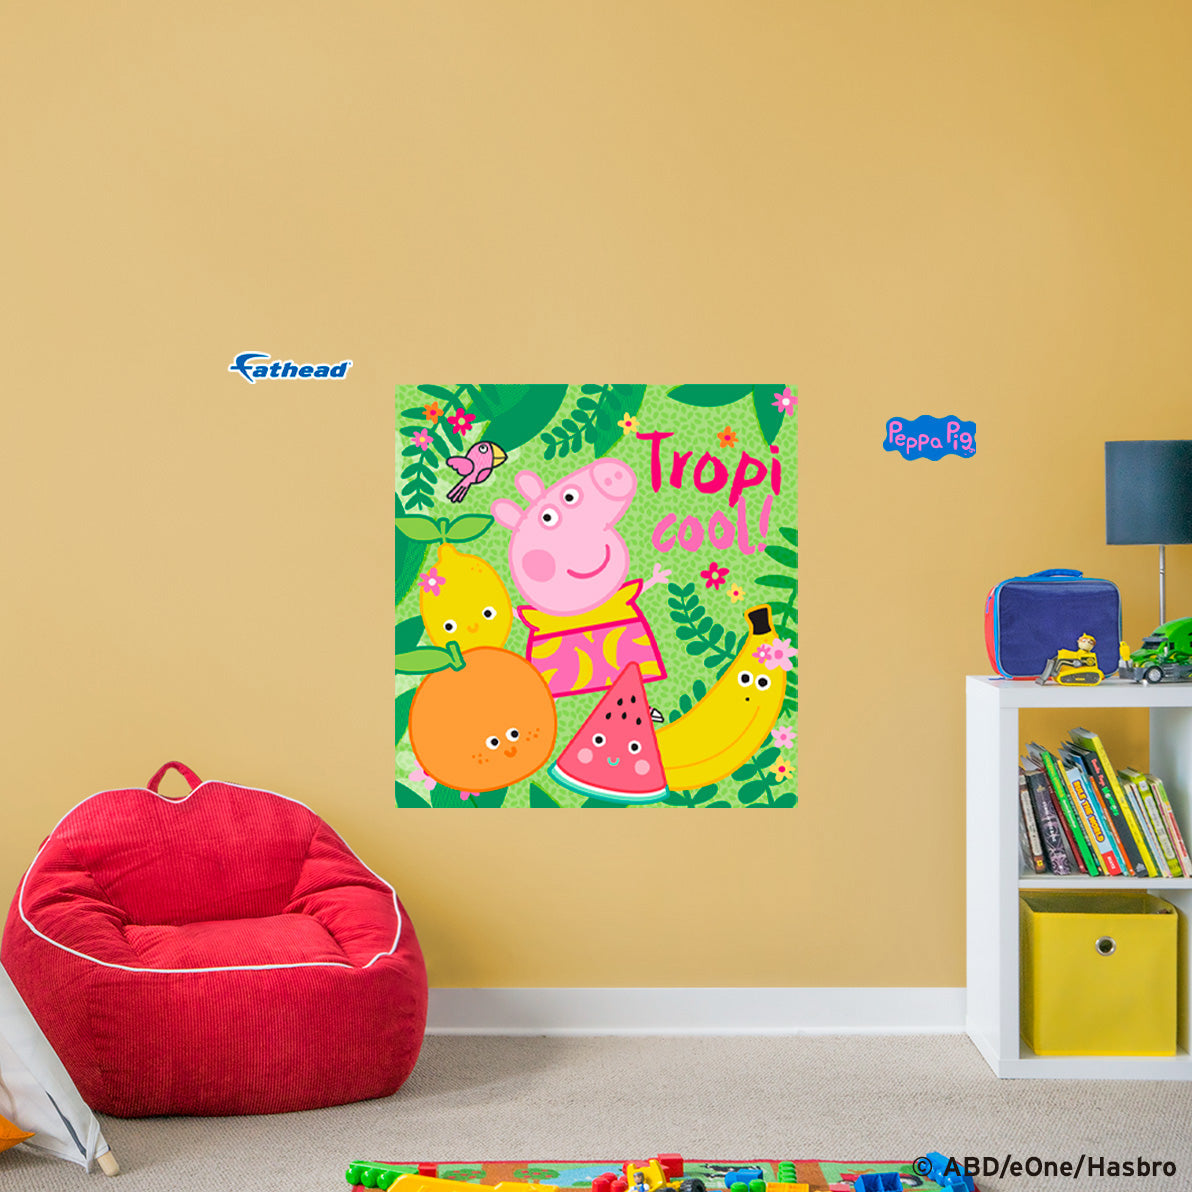 Peppa Pig: Tropi Cool Poster - Officially Licensed Hasbro Removable Adhesive Decal